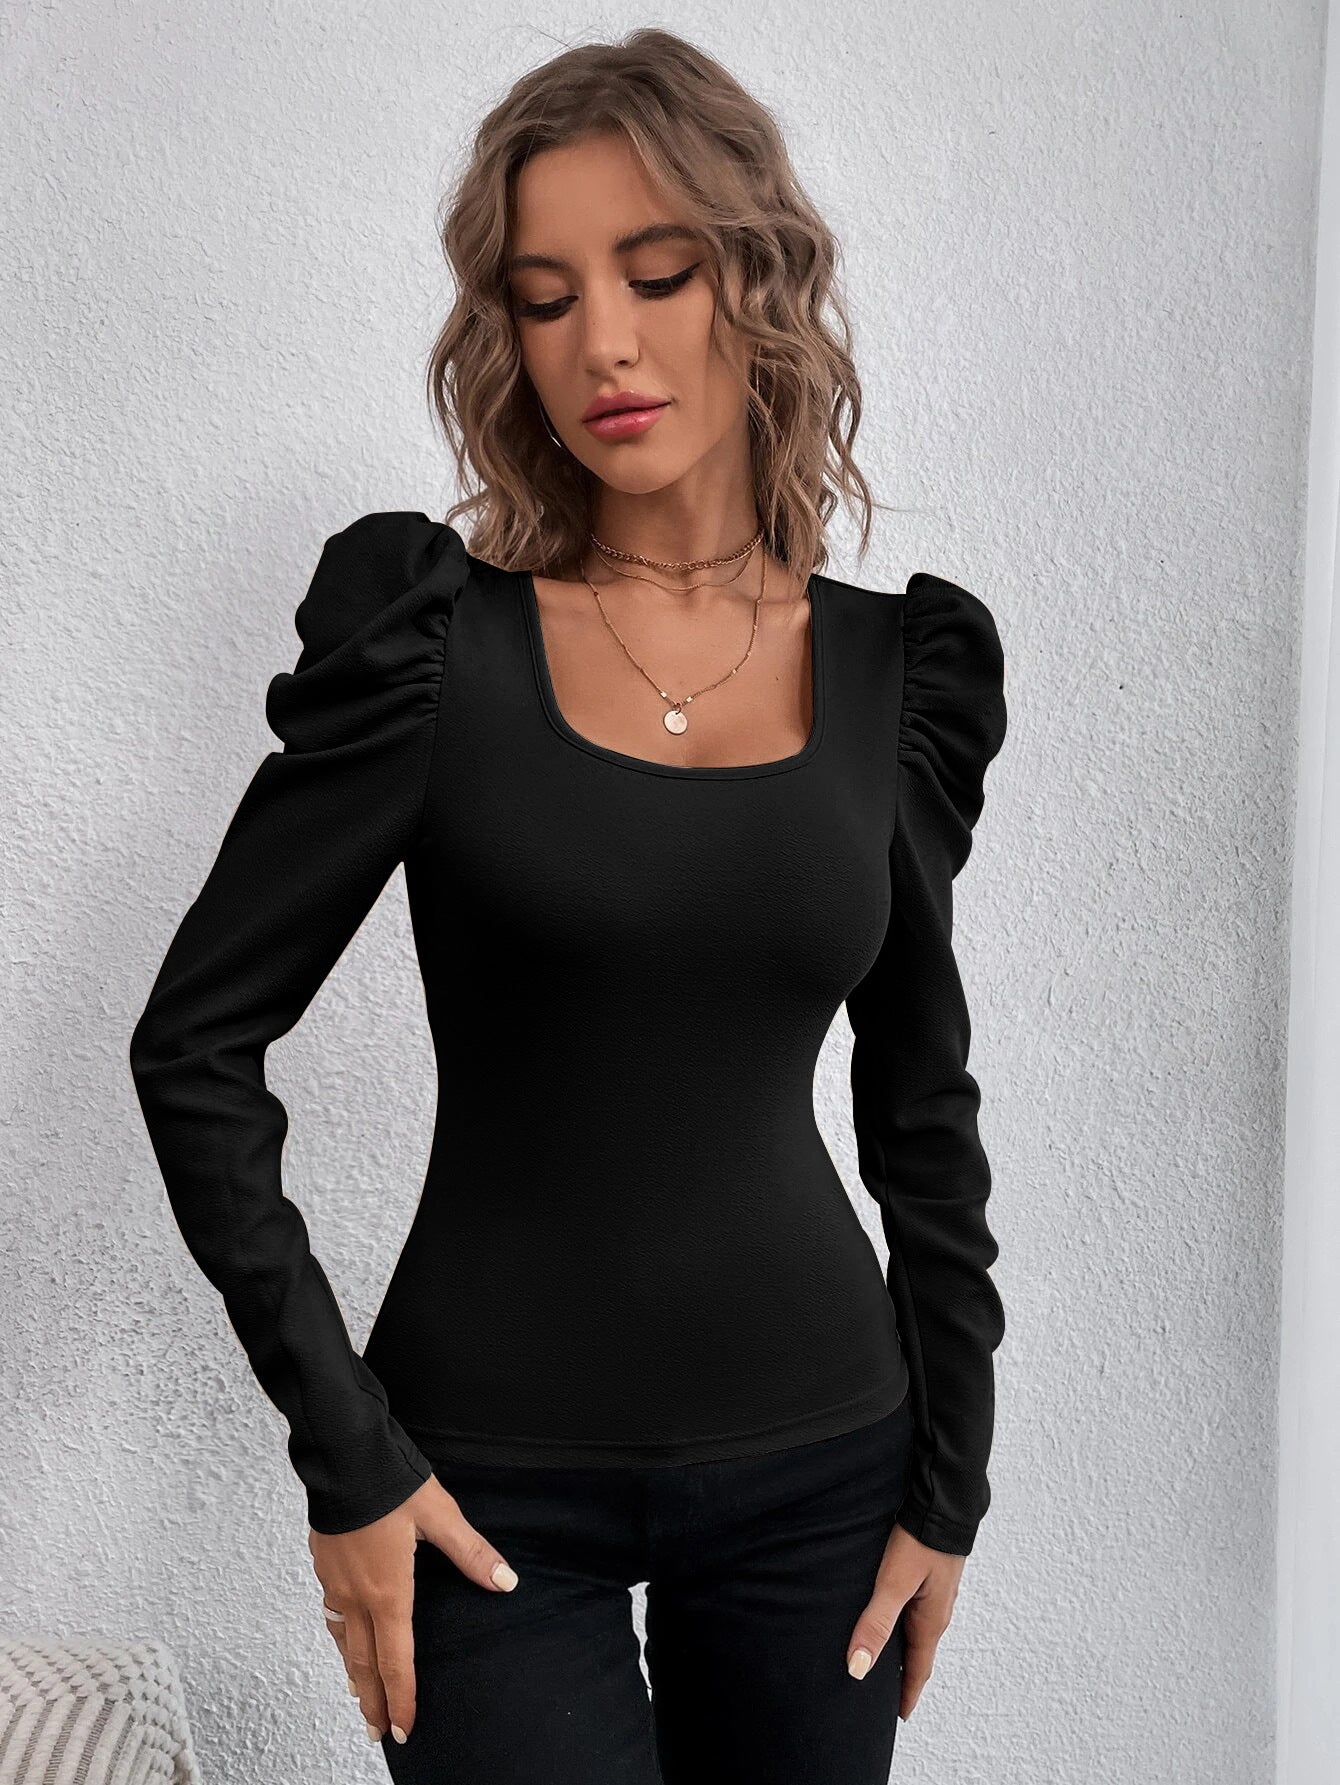 Women's Square Collar Slim-fit Knitted Long-sleeved T-shirt